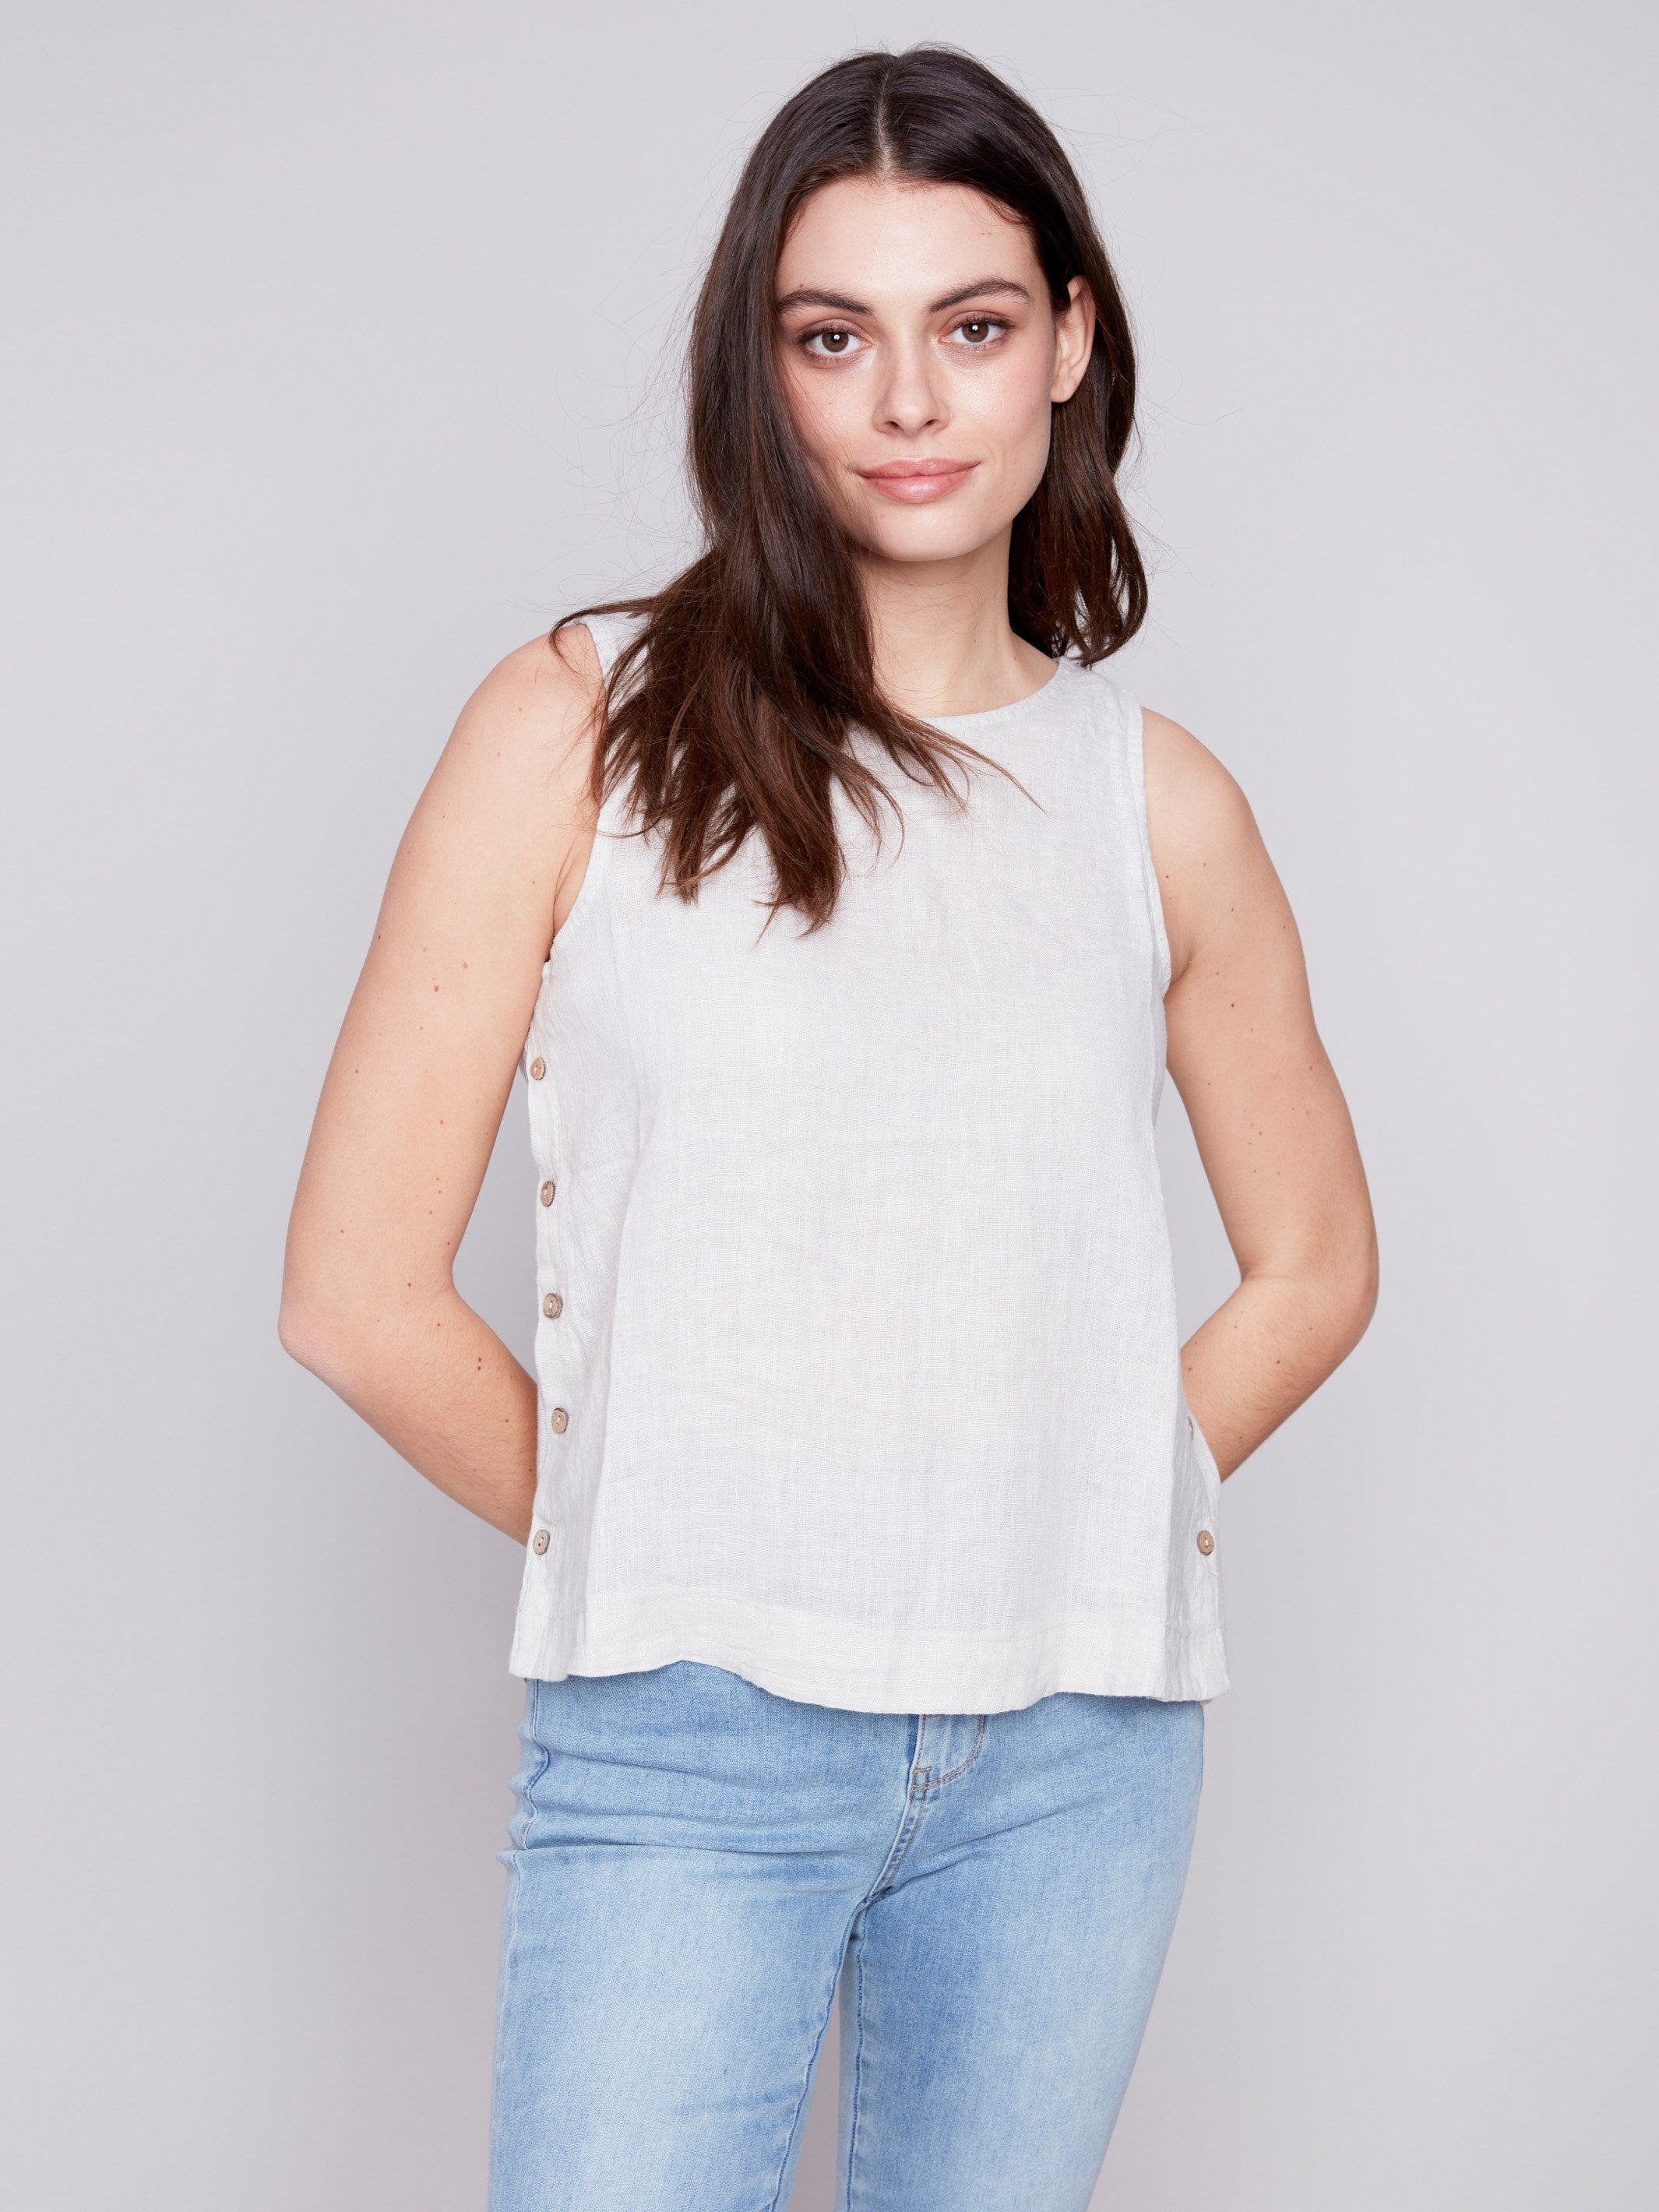 Sleeveless Linen Top with Side Buttons - Natural - Charlie B Collection Canada - Image 3